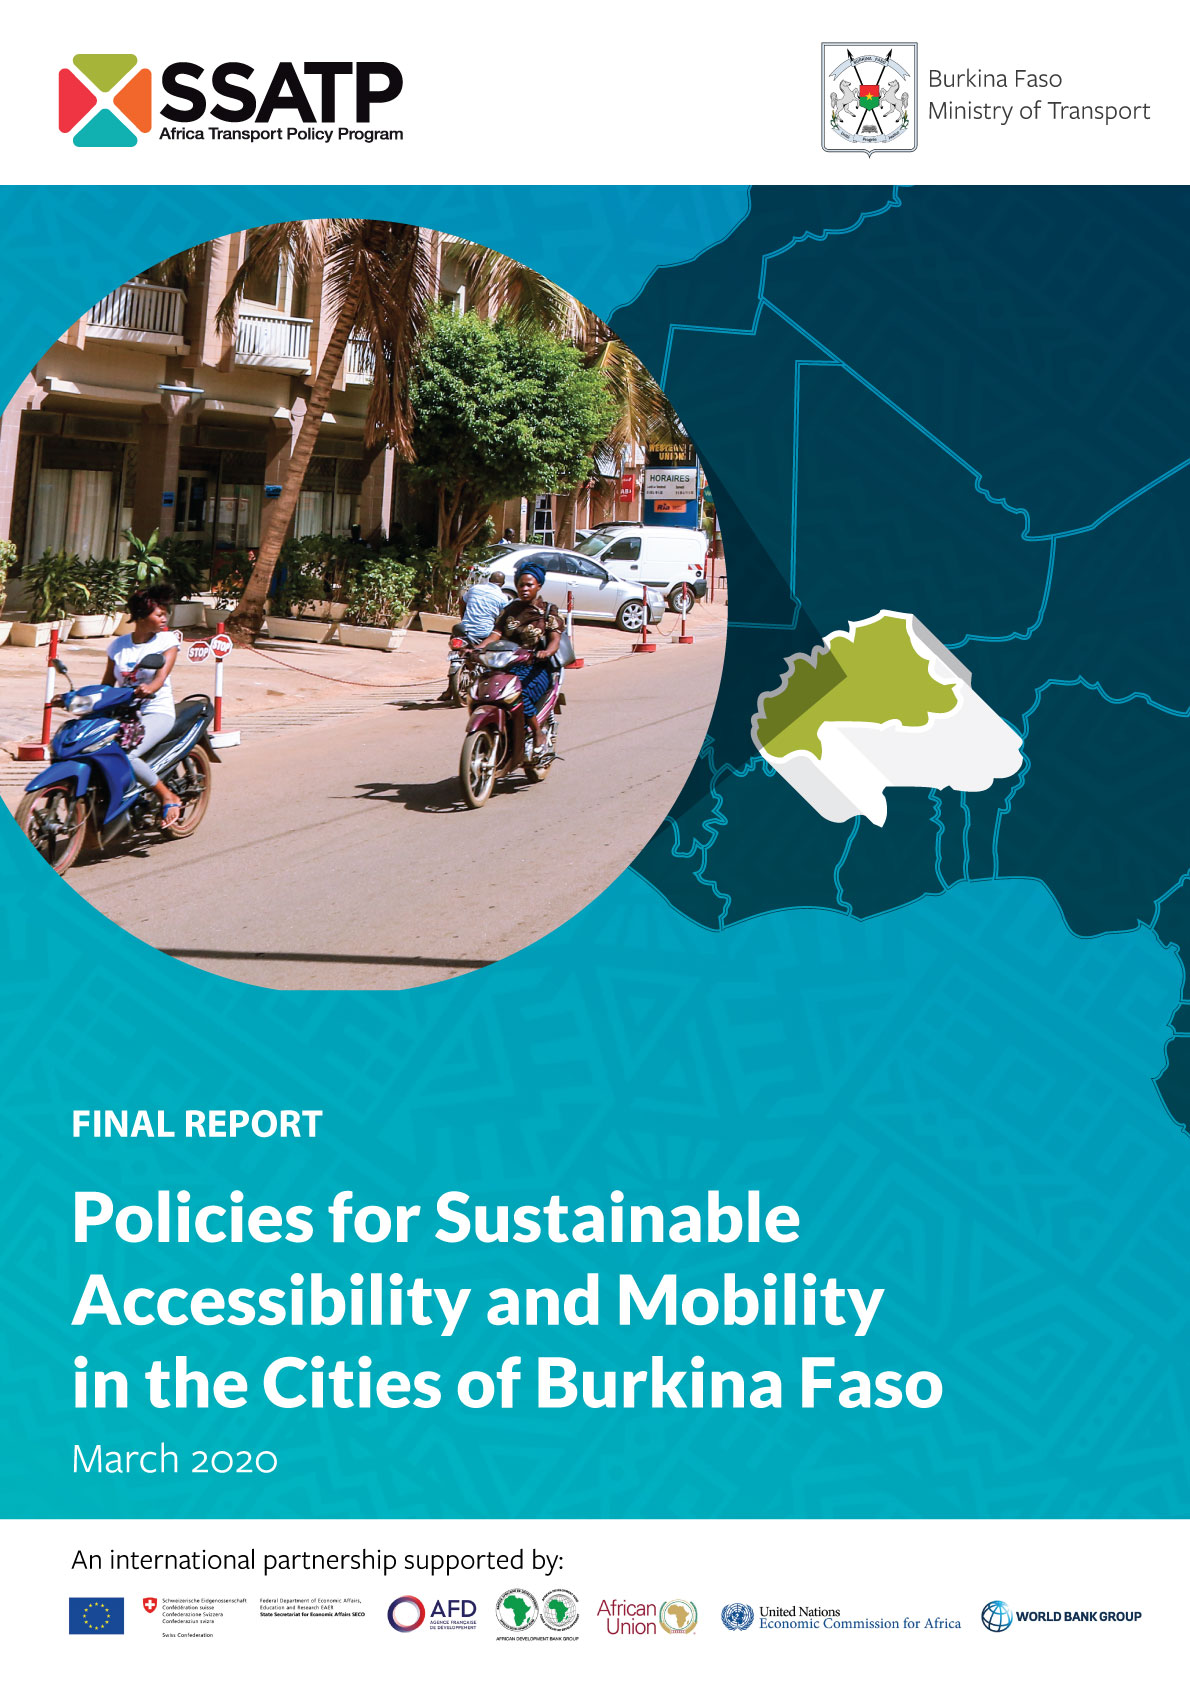 Policies for Sustainable Accessibility and Mobility in the Cities of Burkina Faso - Policy & Strategy Paper